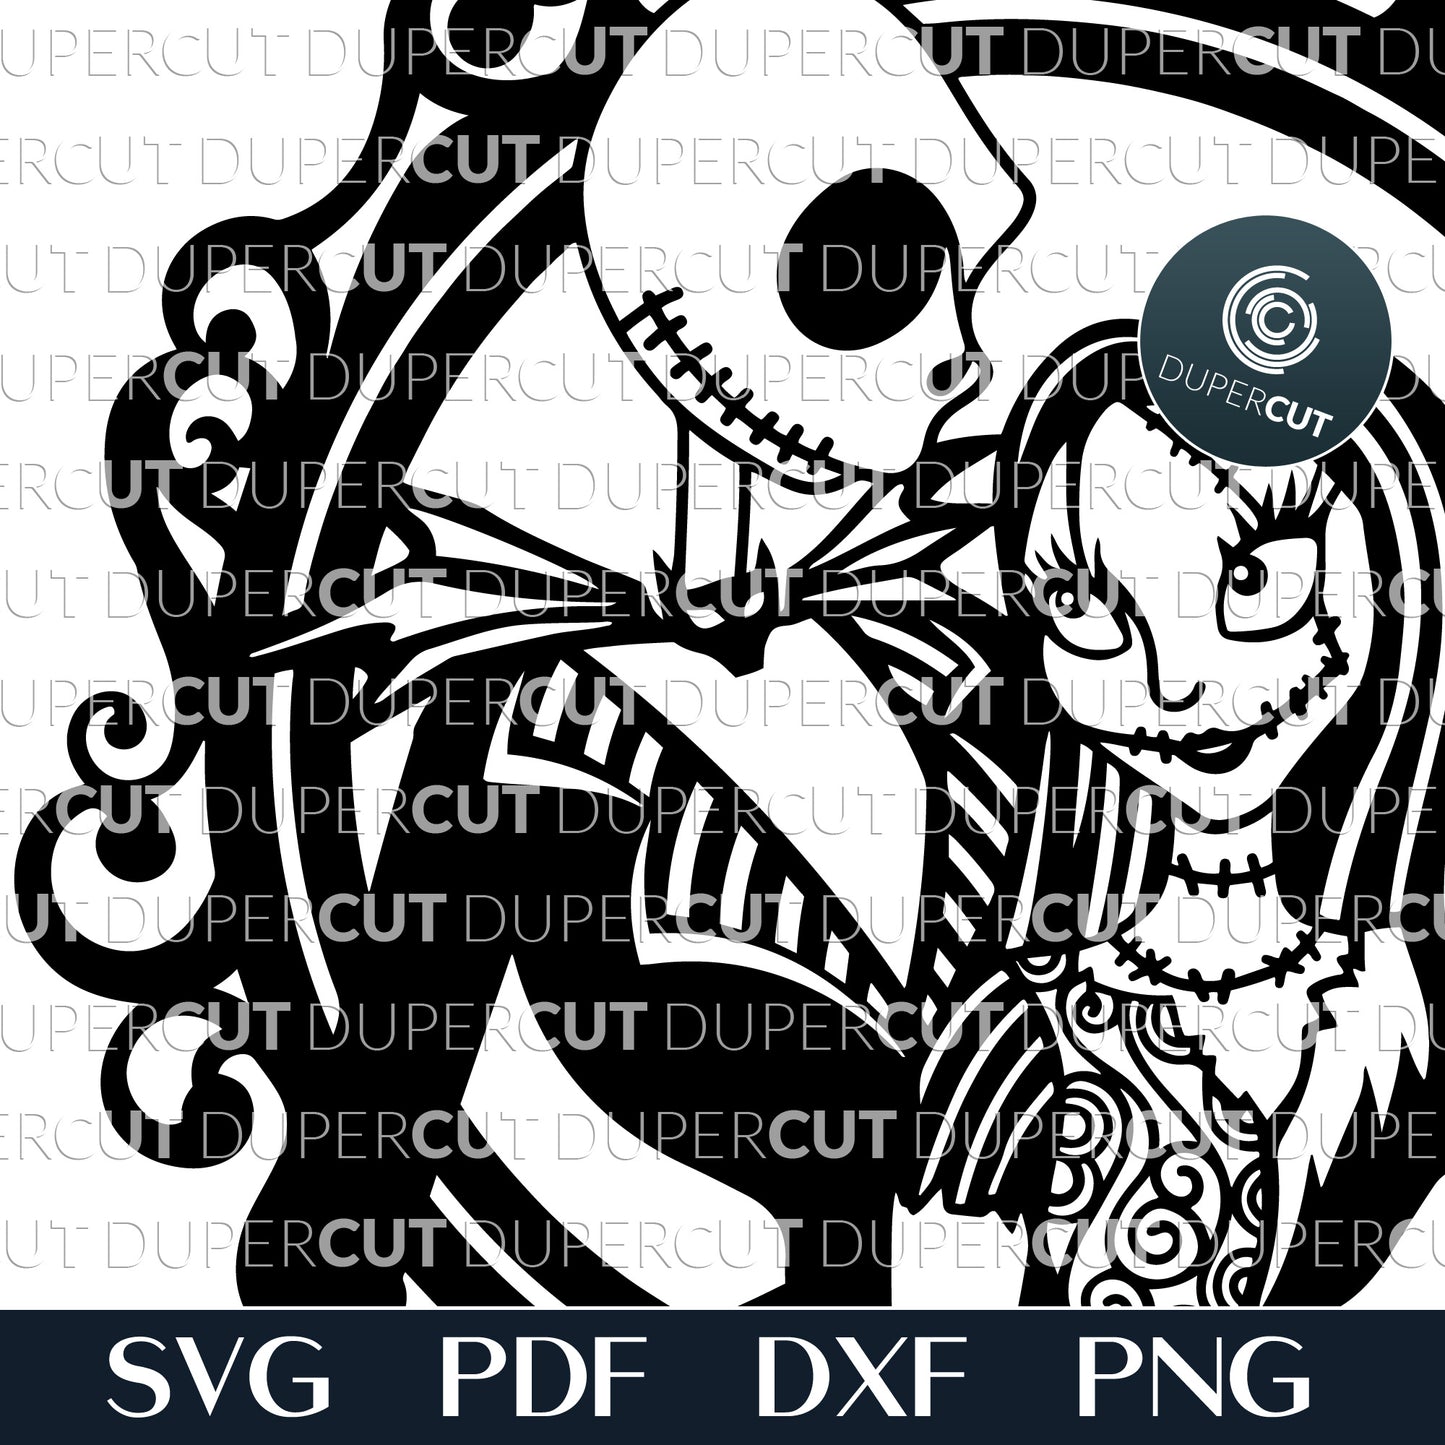 Jack Skellington and Sally Halloween portrait layered cutting template - SVG DXF PNG vector files for laser and digital machines Glowforge, Cricut, Silhouette, CNC plasma by DuperCut